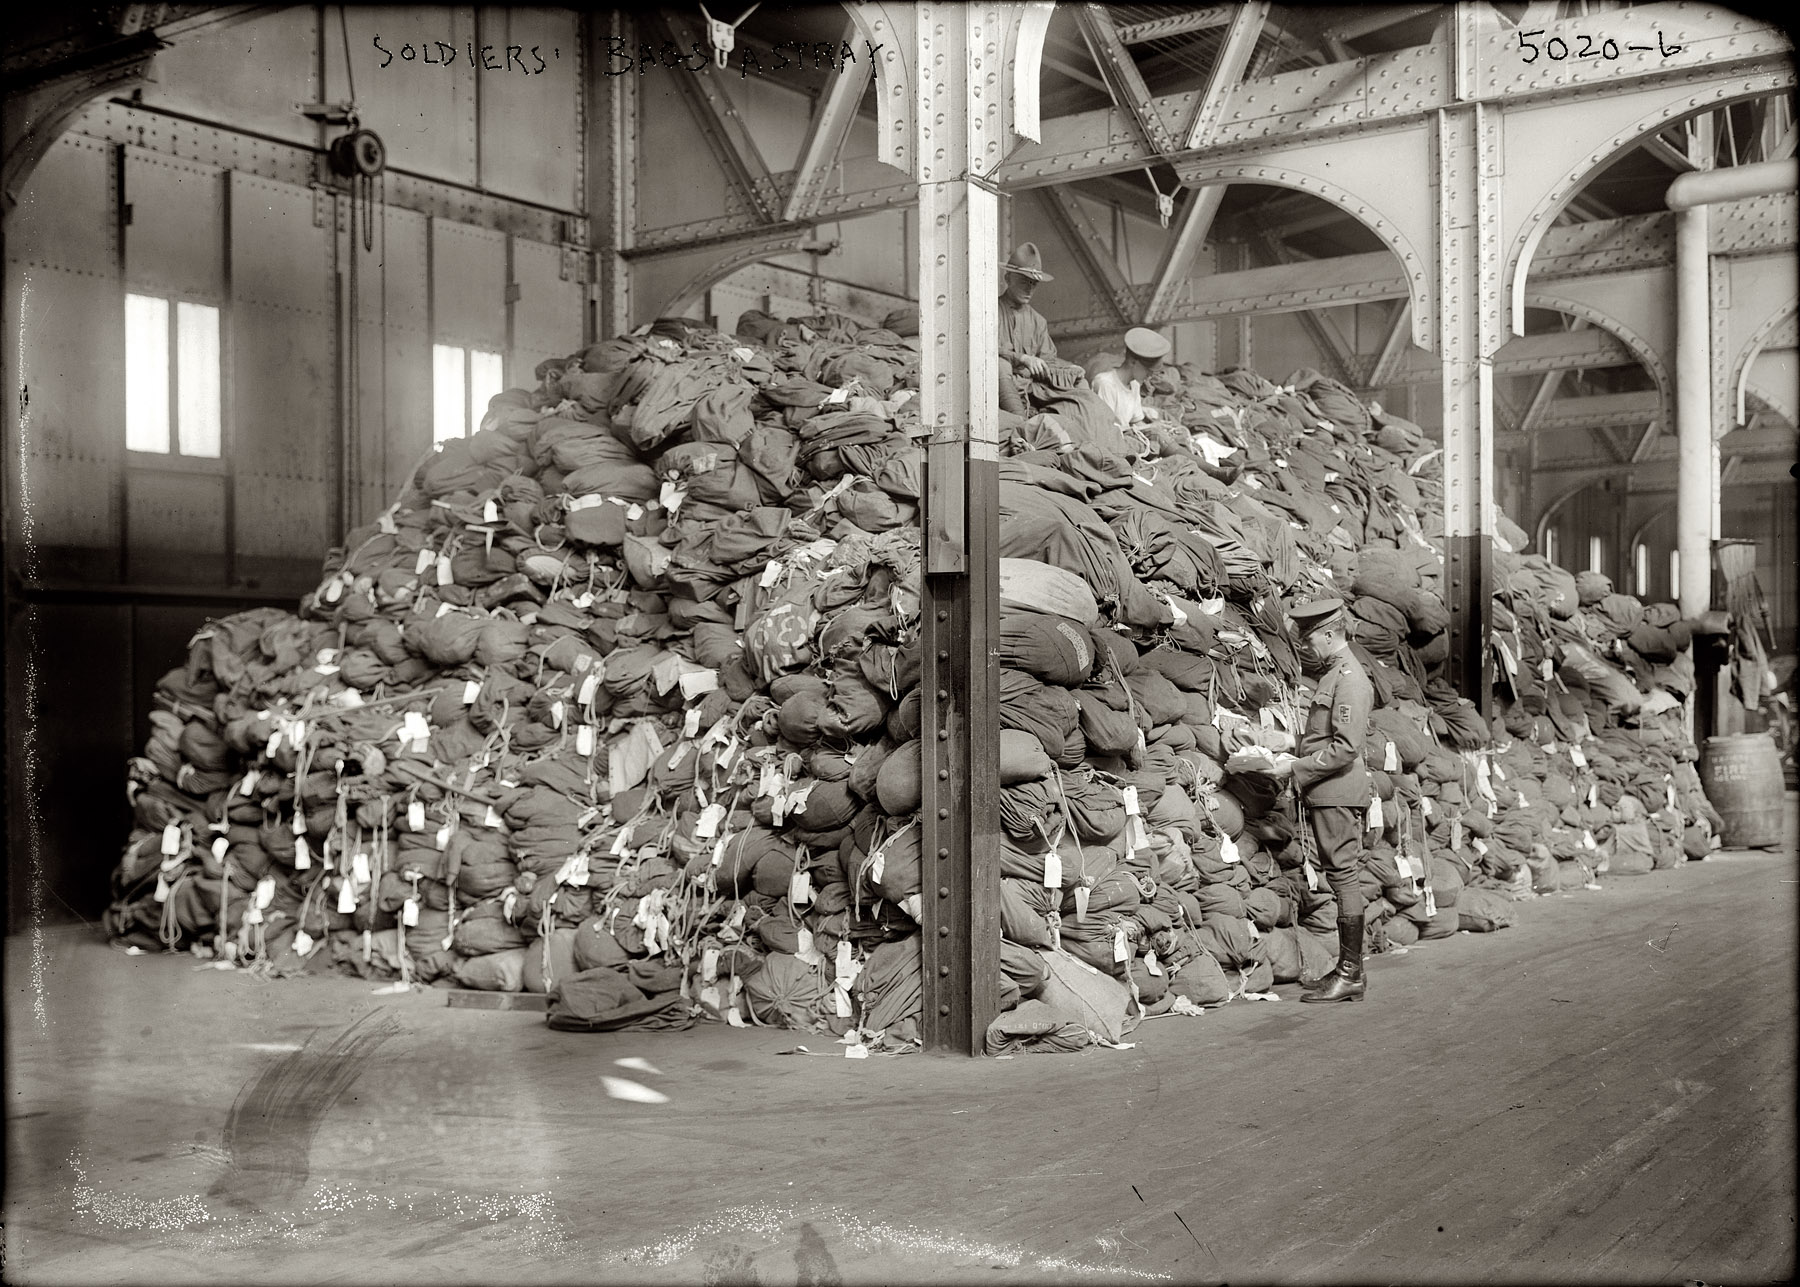 New York or New Jersey circa 1919. "Soldiers' bags astray." View full size. 5x7 glass negative, George Grantham Bain Collection, Library of Congress.